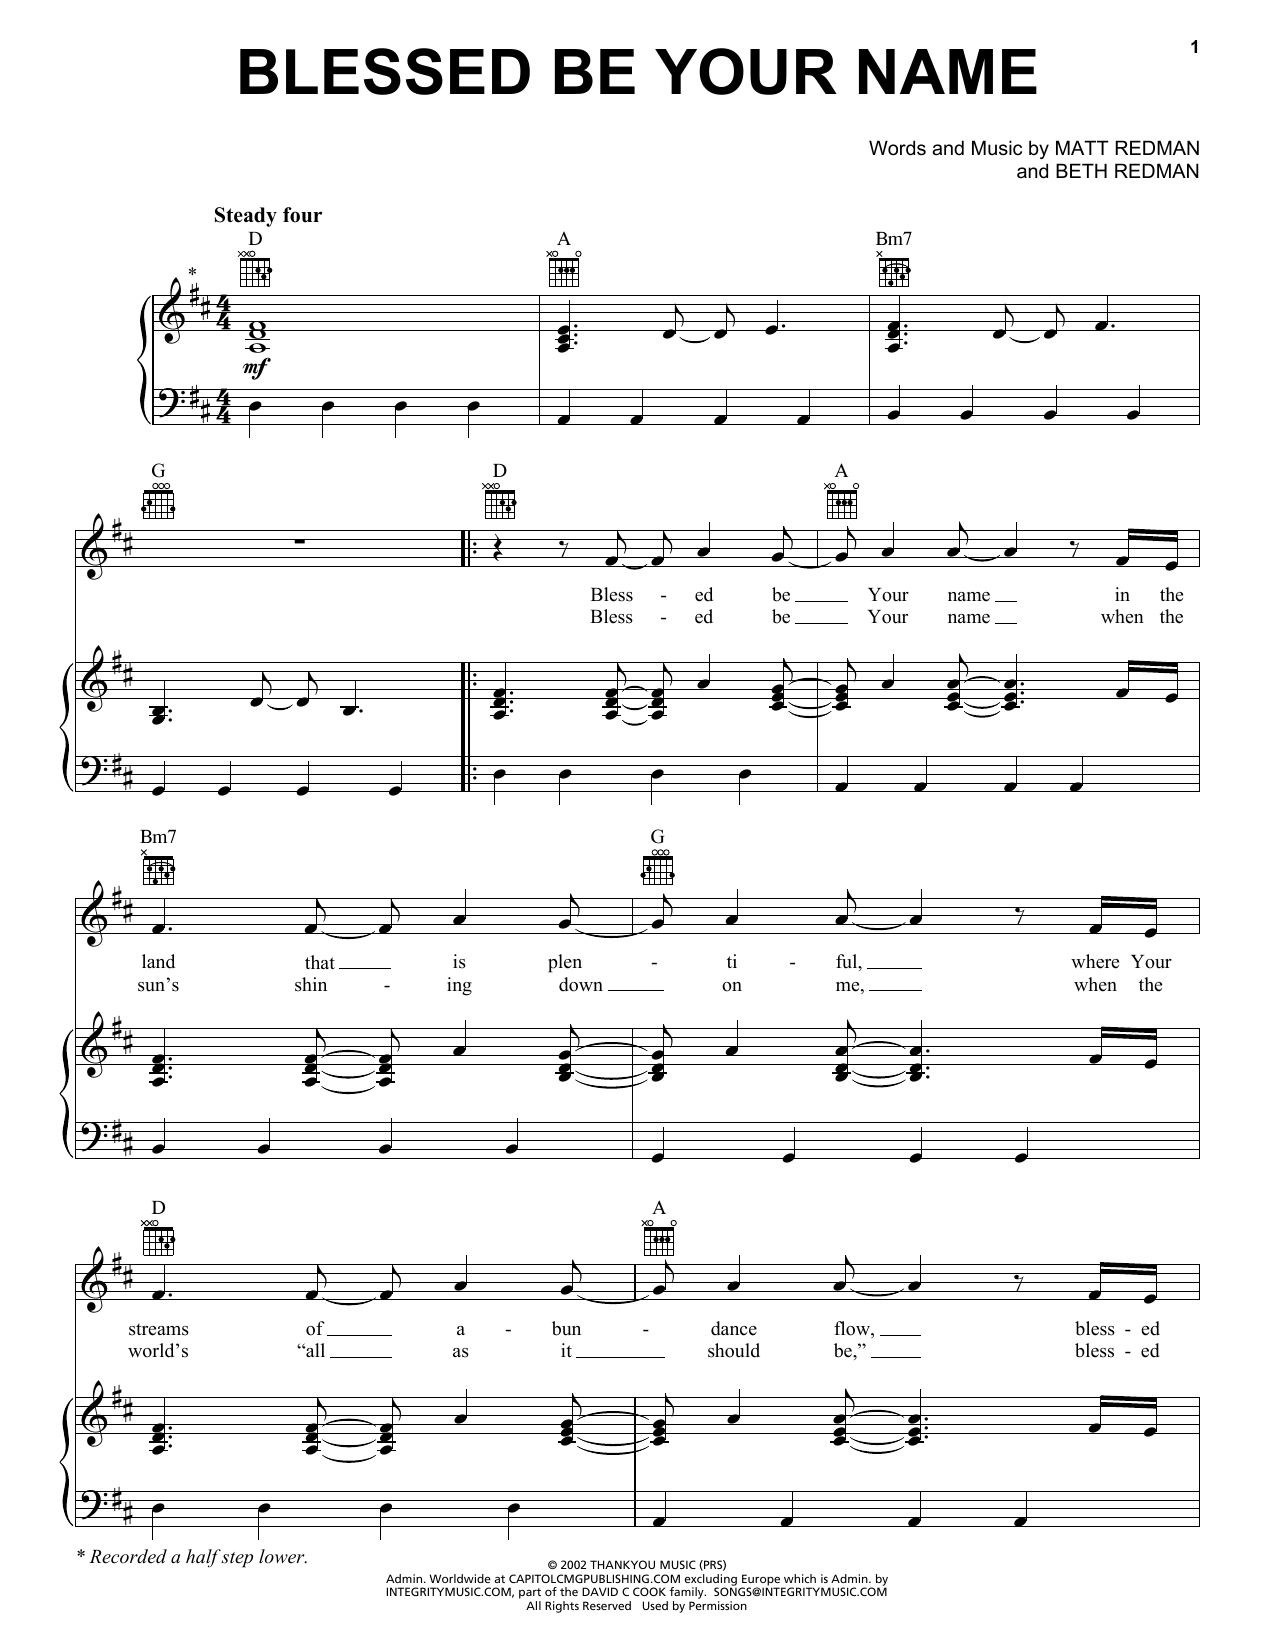 Blessed Be Your Name Chords Tree63 Blessed Be Your Name Sheet Music Notes Chords